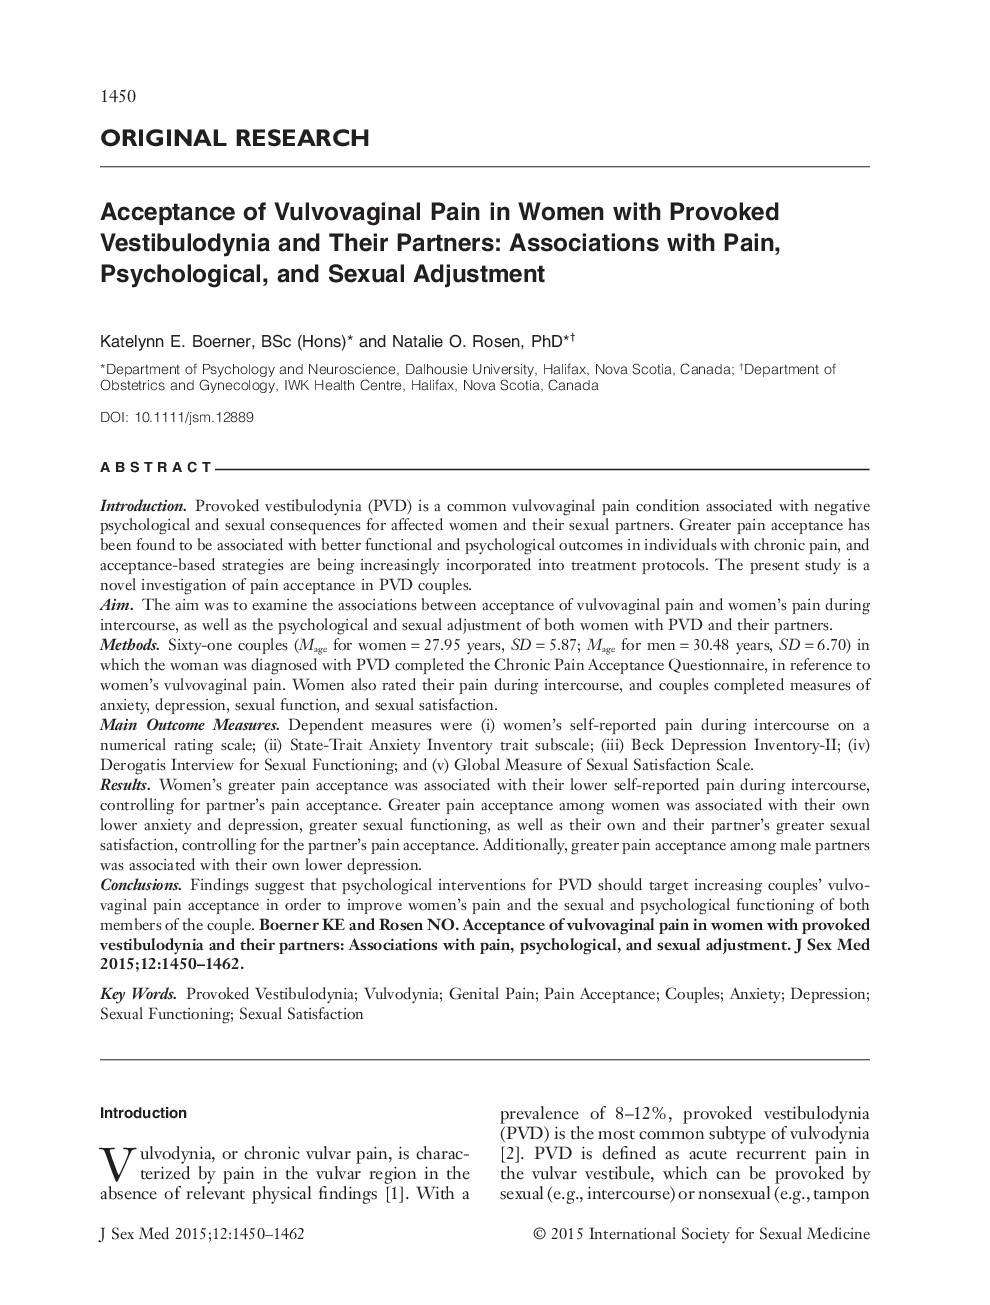 Acceptance of Vulvovaginal Pain in Women with Provoked Vestibulodynia and Their Partners: Associations with Pain, Psychological, and Sexual Adjustment 